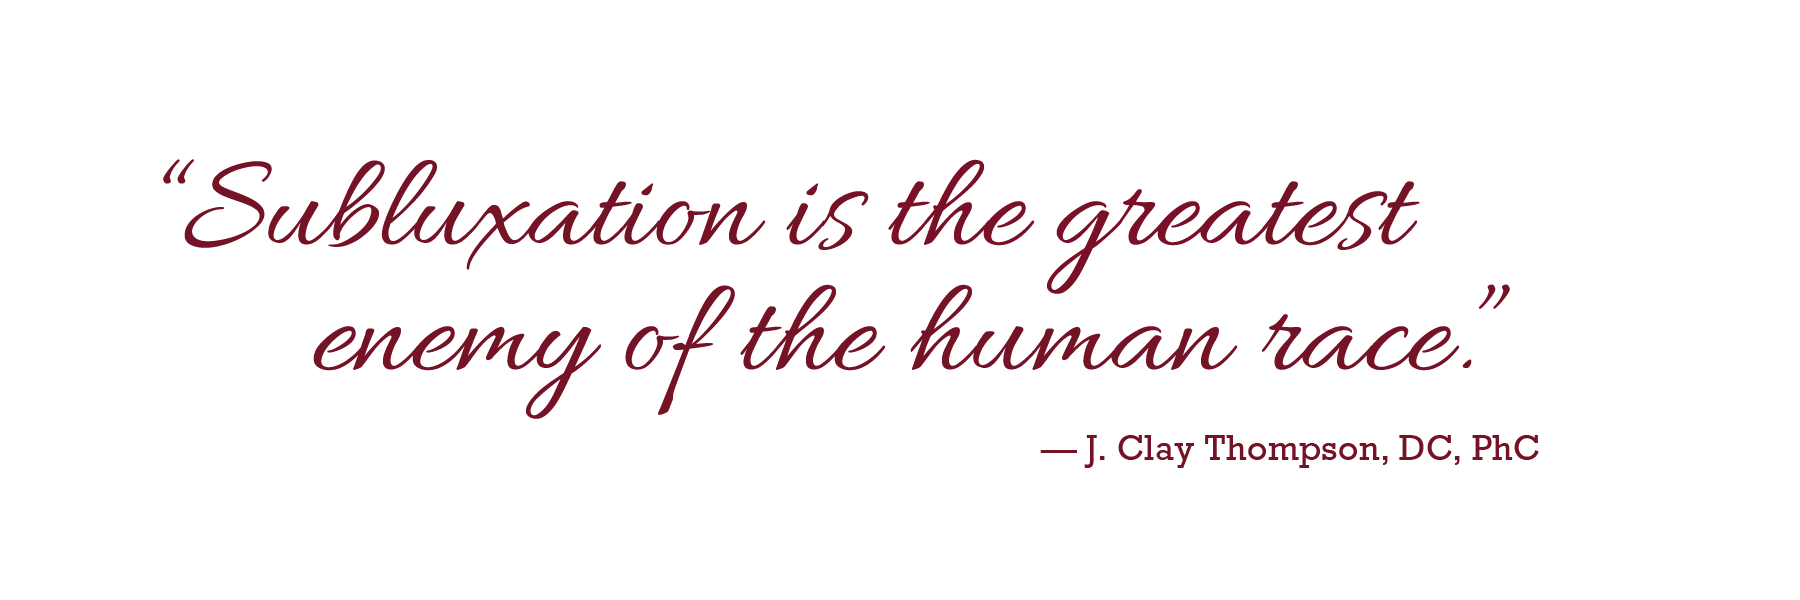 J. Clay Thompson Technique Foundation Home Page Quote